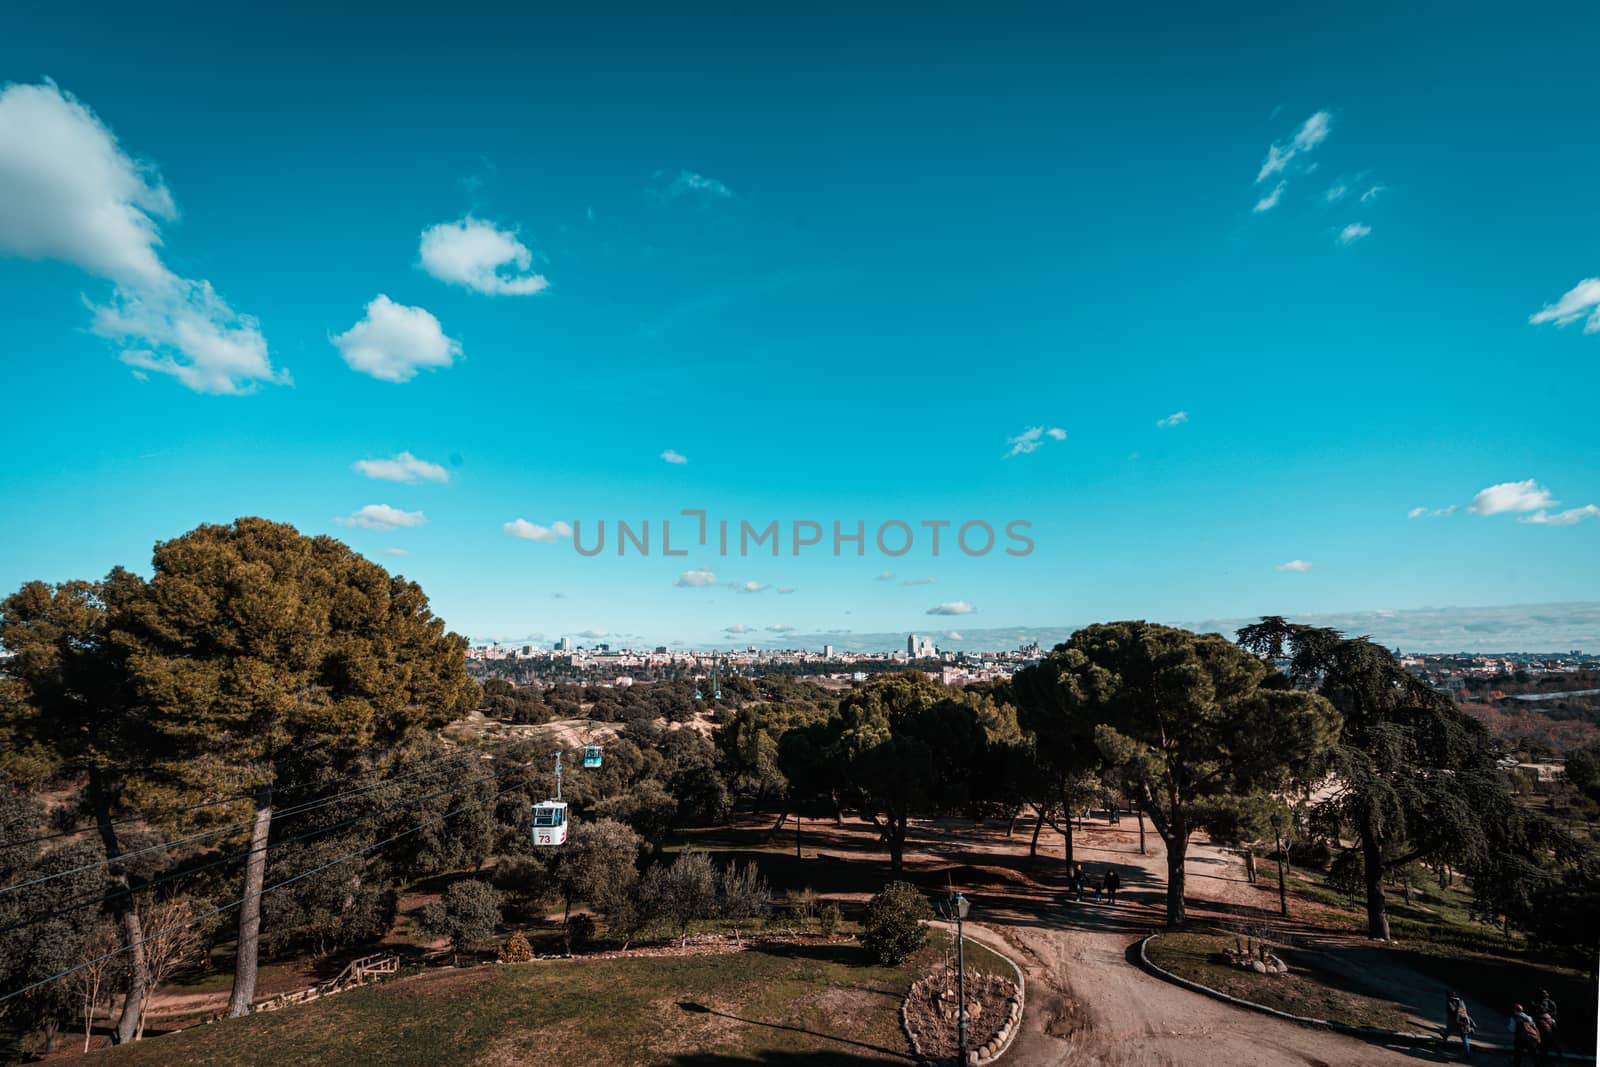 Cable car over casa de campo park in Madrid, Spain. by tanaonte